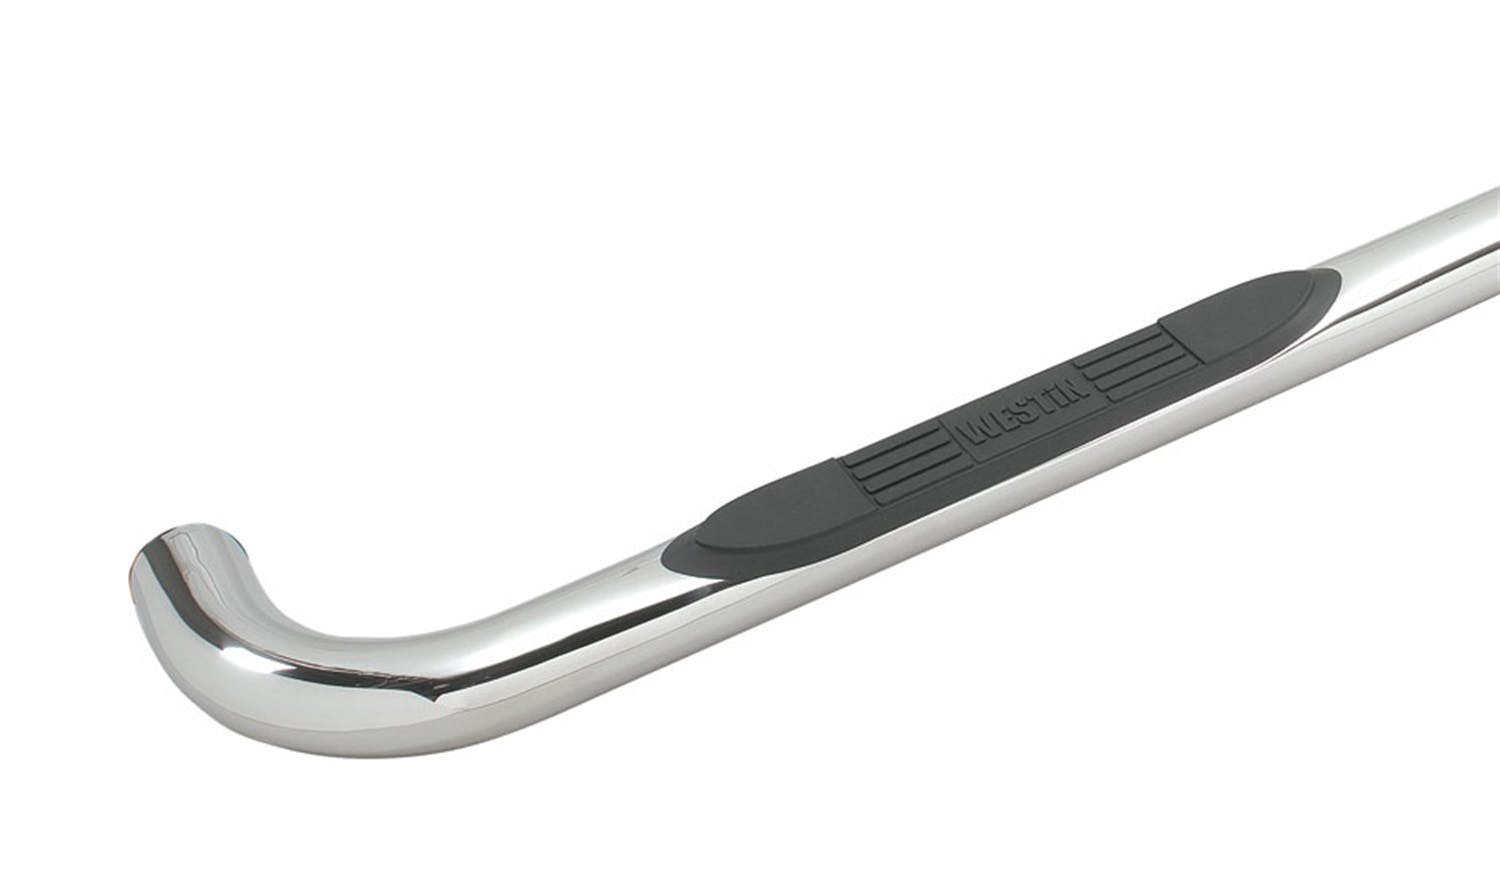 Westin Automotive 23-3540 E-Series 3 Nerf Step Bars Stainless Steel